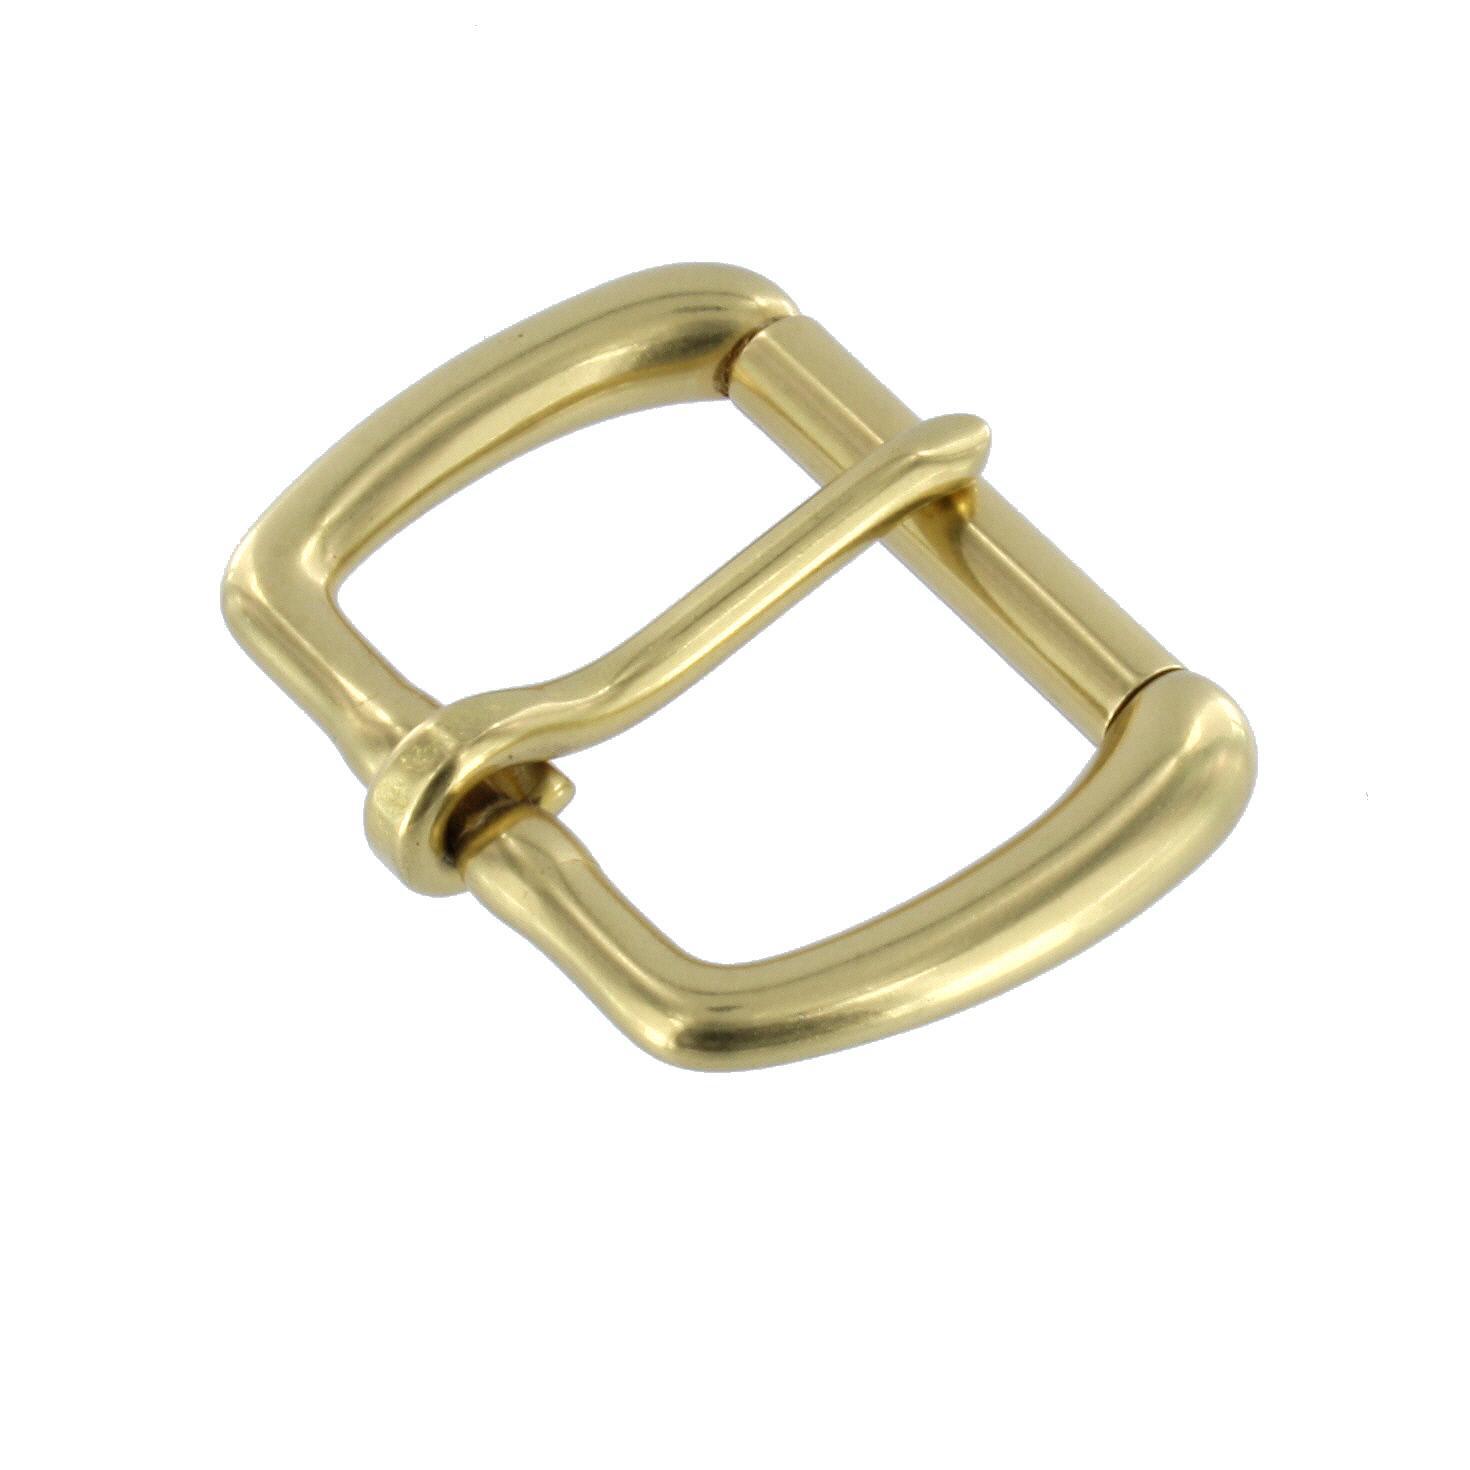 Buckle 401 for 5/8 or 16 mm wide straps in Brass or Antiqued Brass, Brettuns Village